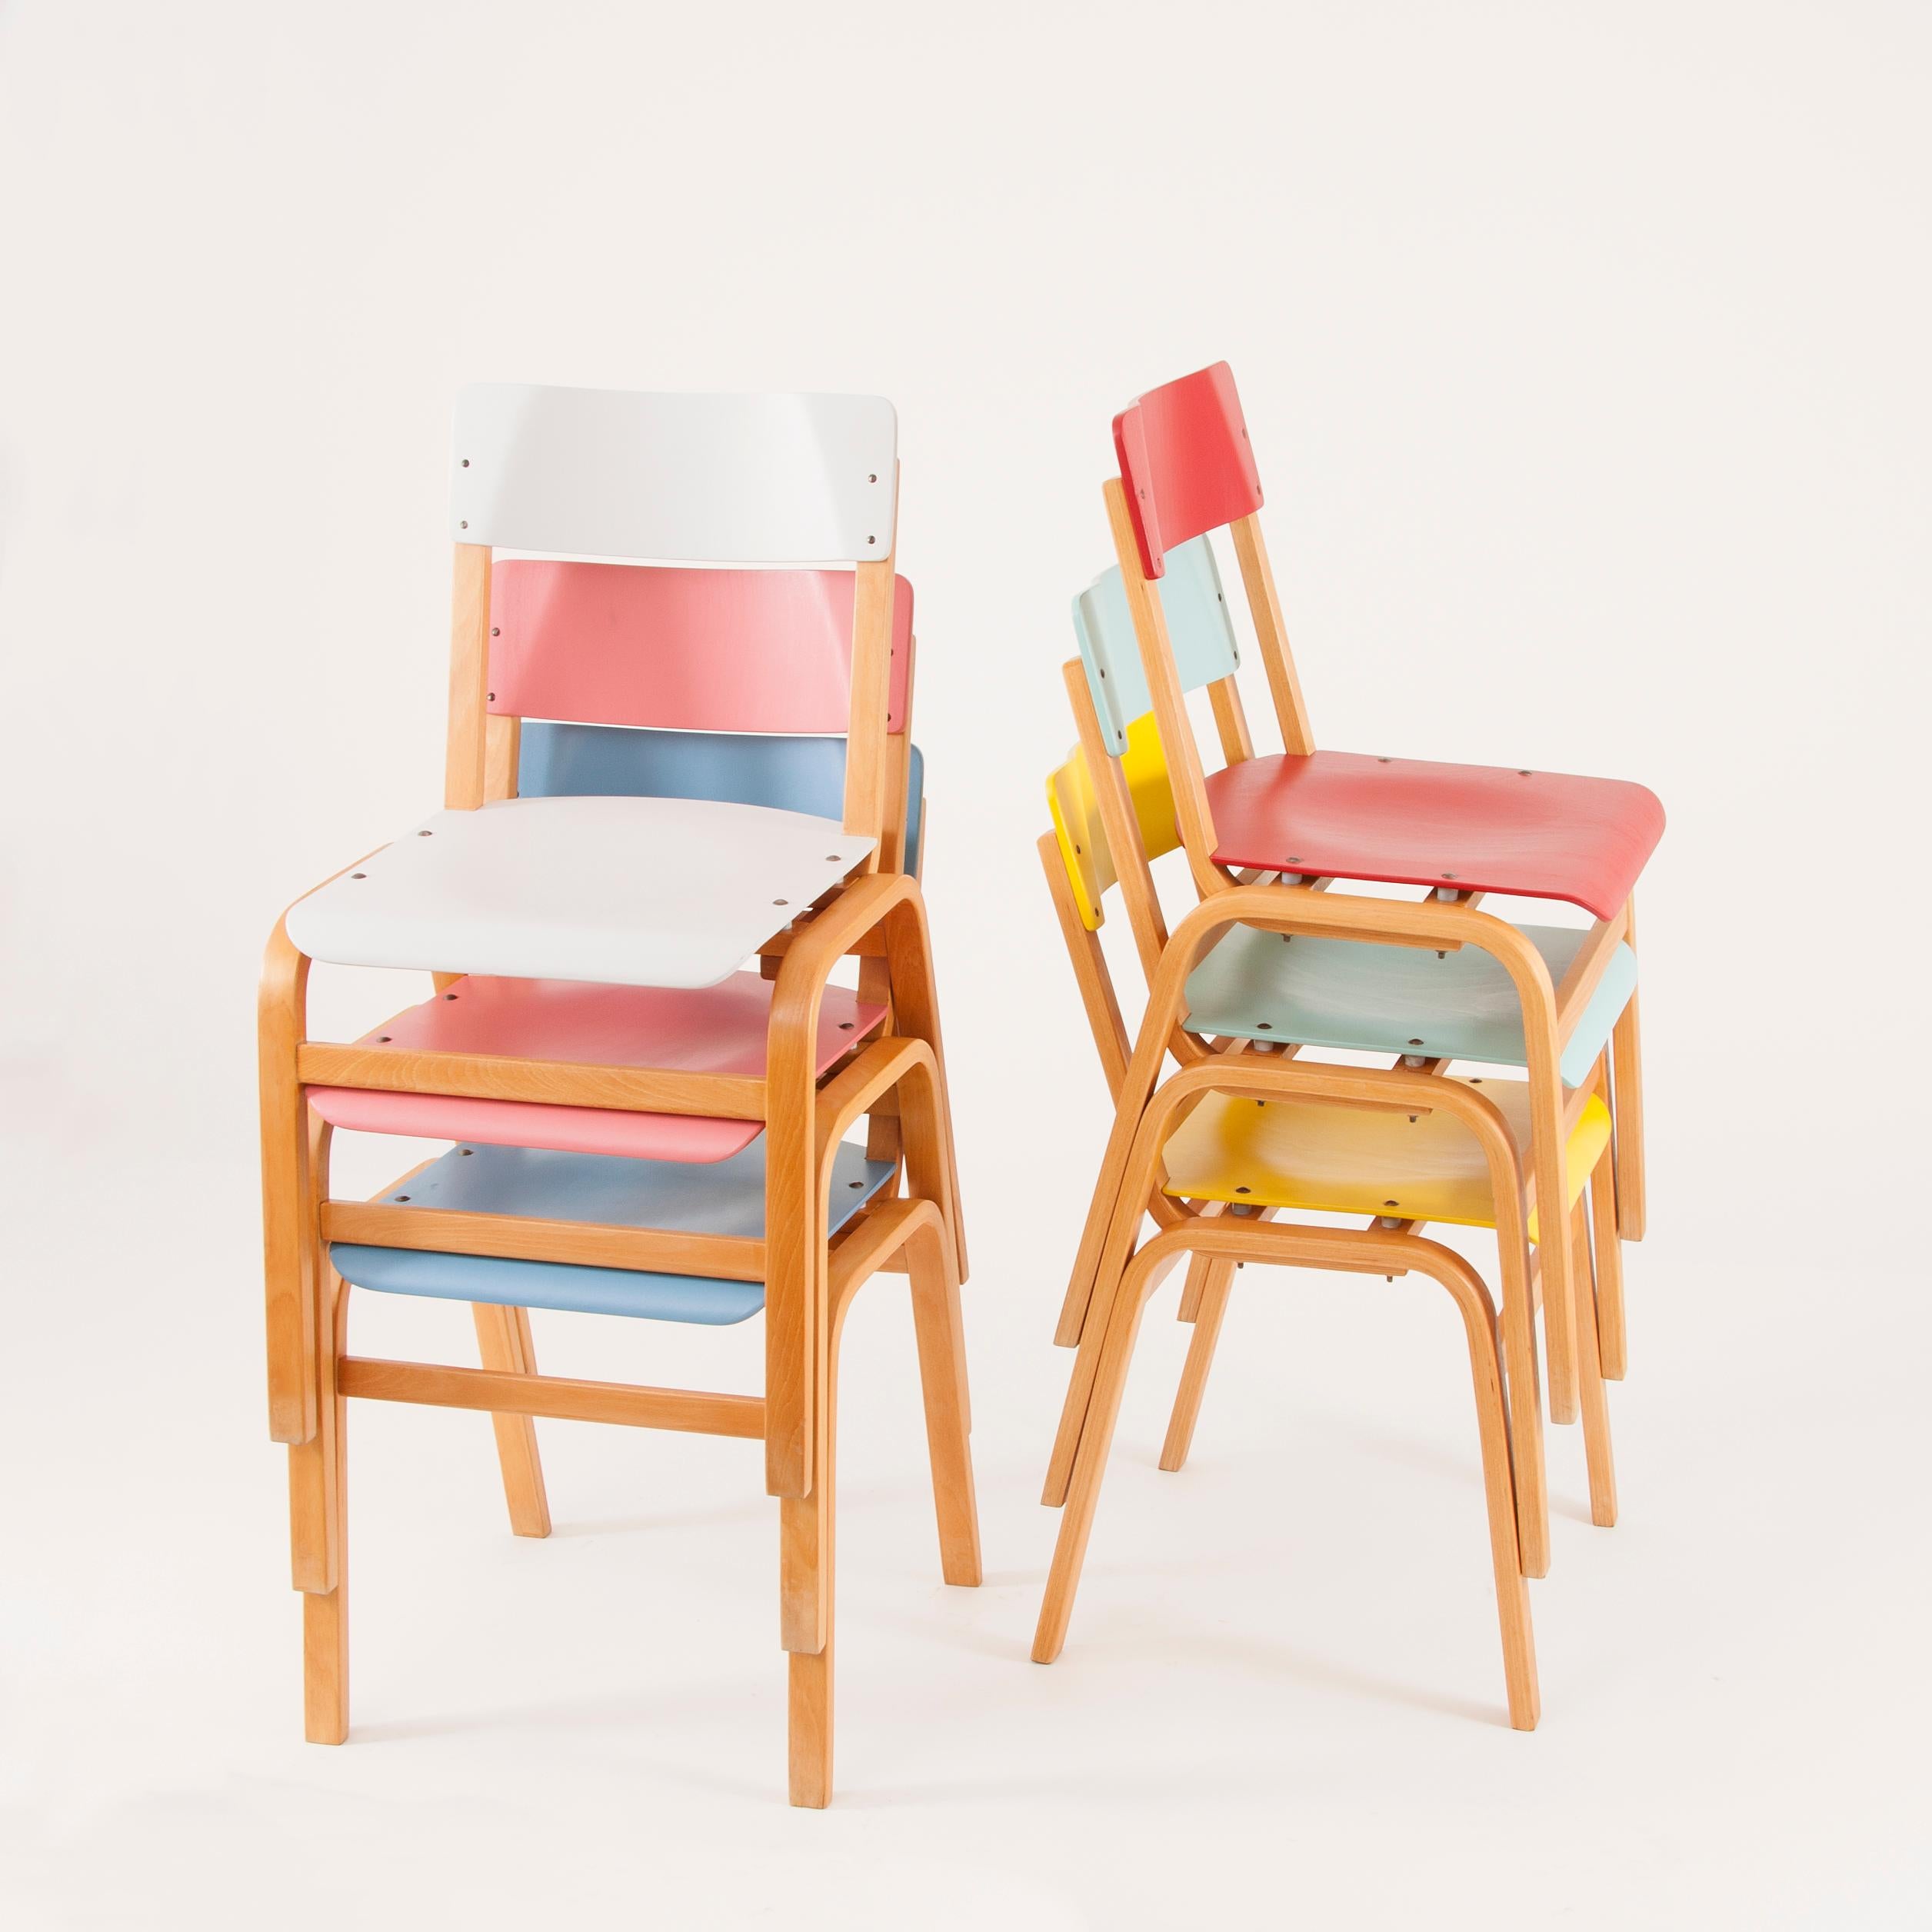 Up to 24 beautiful midcentury bentwood stackable chairs from the 1960s, executed by Ton / former Czechoslovakia. These chairs are professionally restored and in excellent condition. They are available in six different colors: yellow, red,